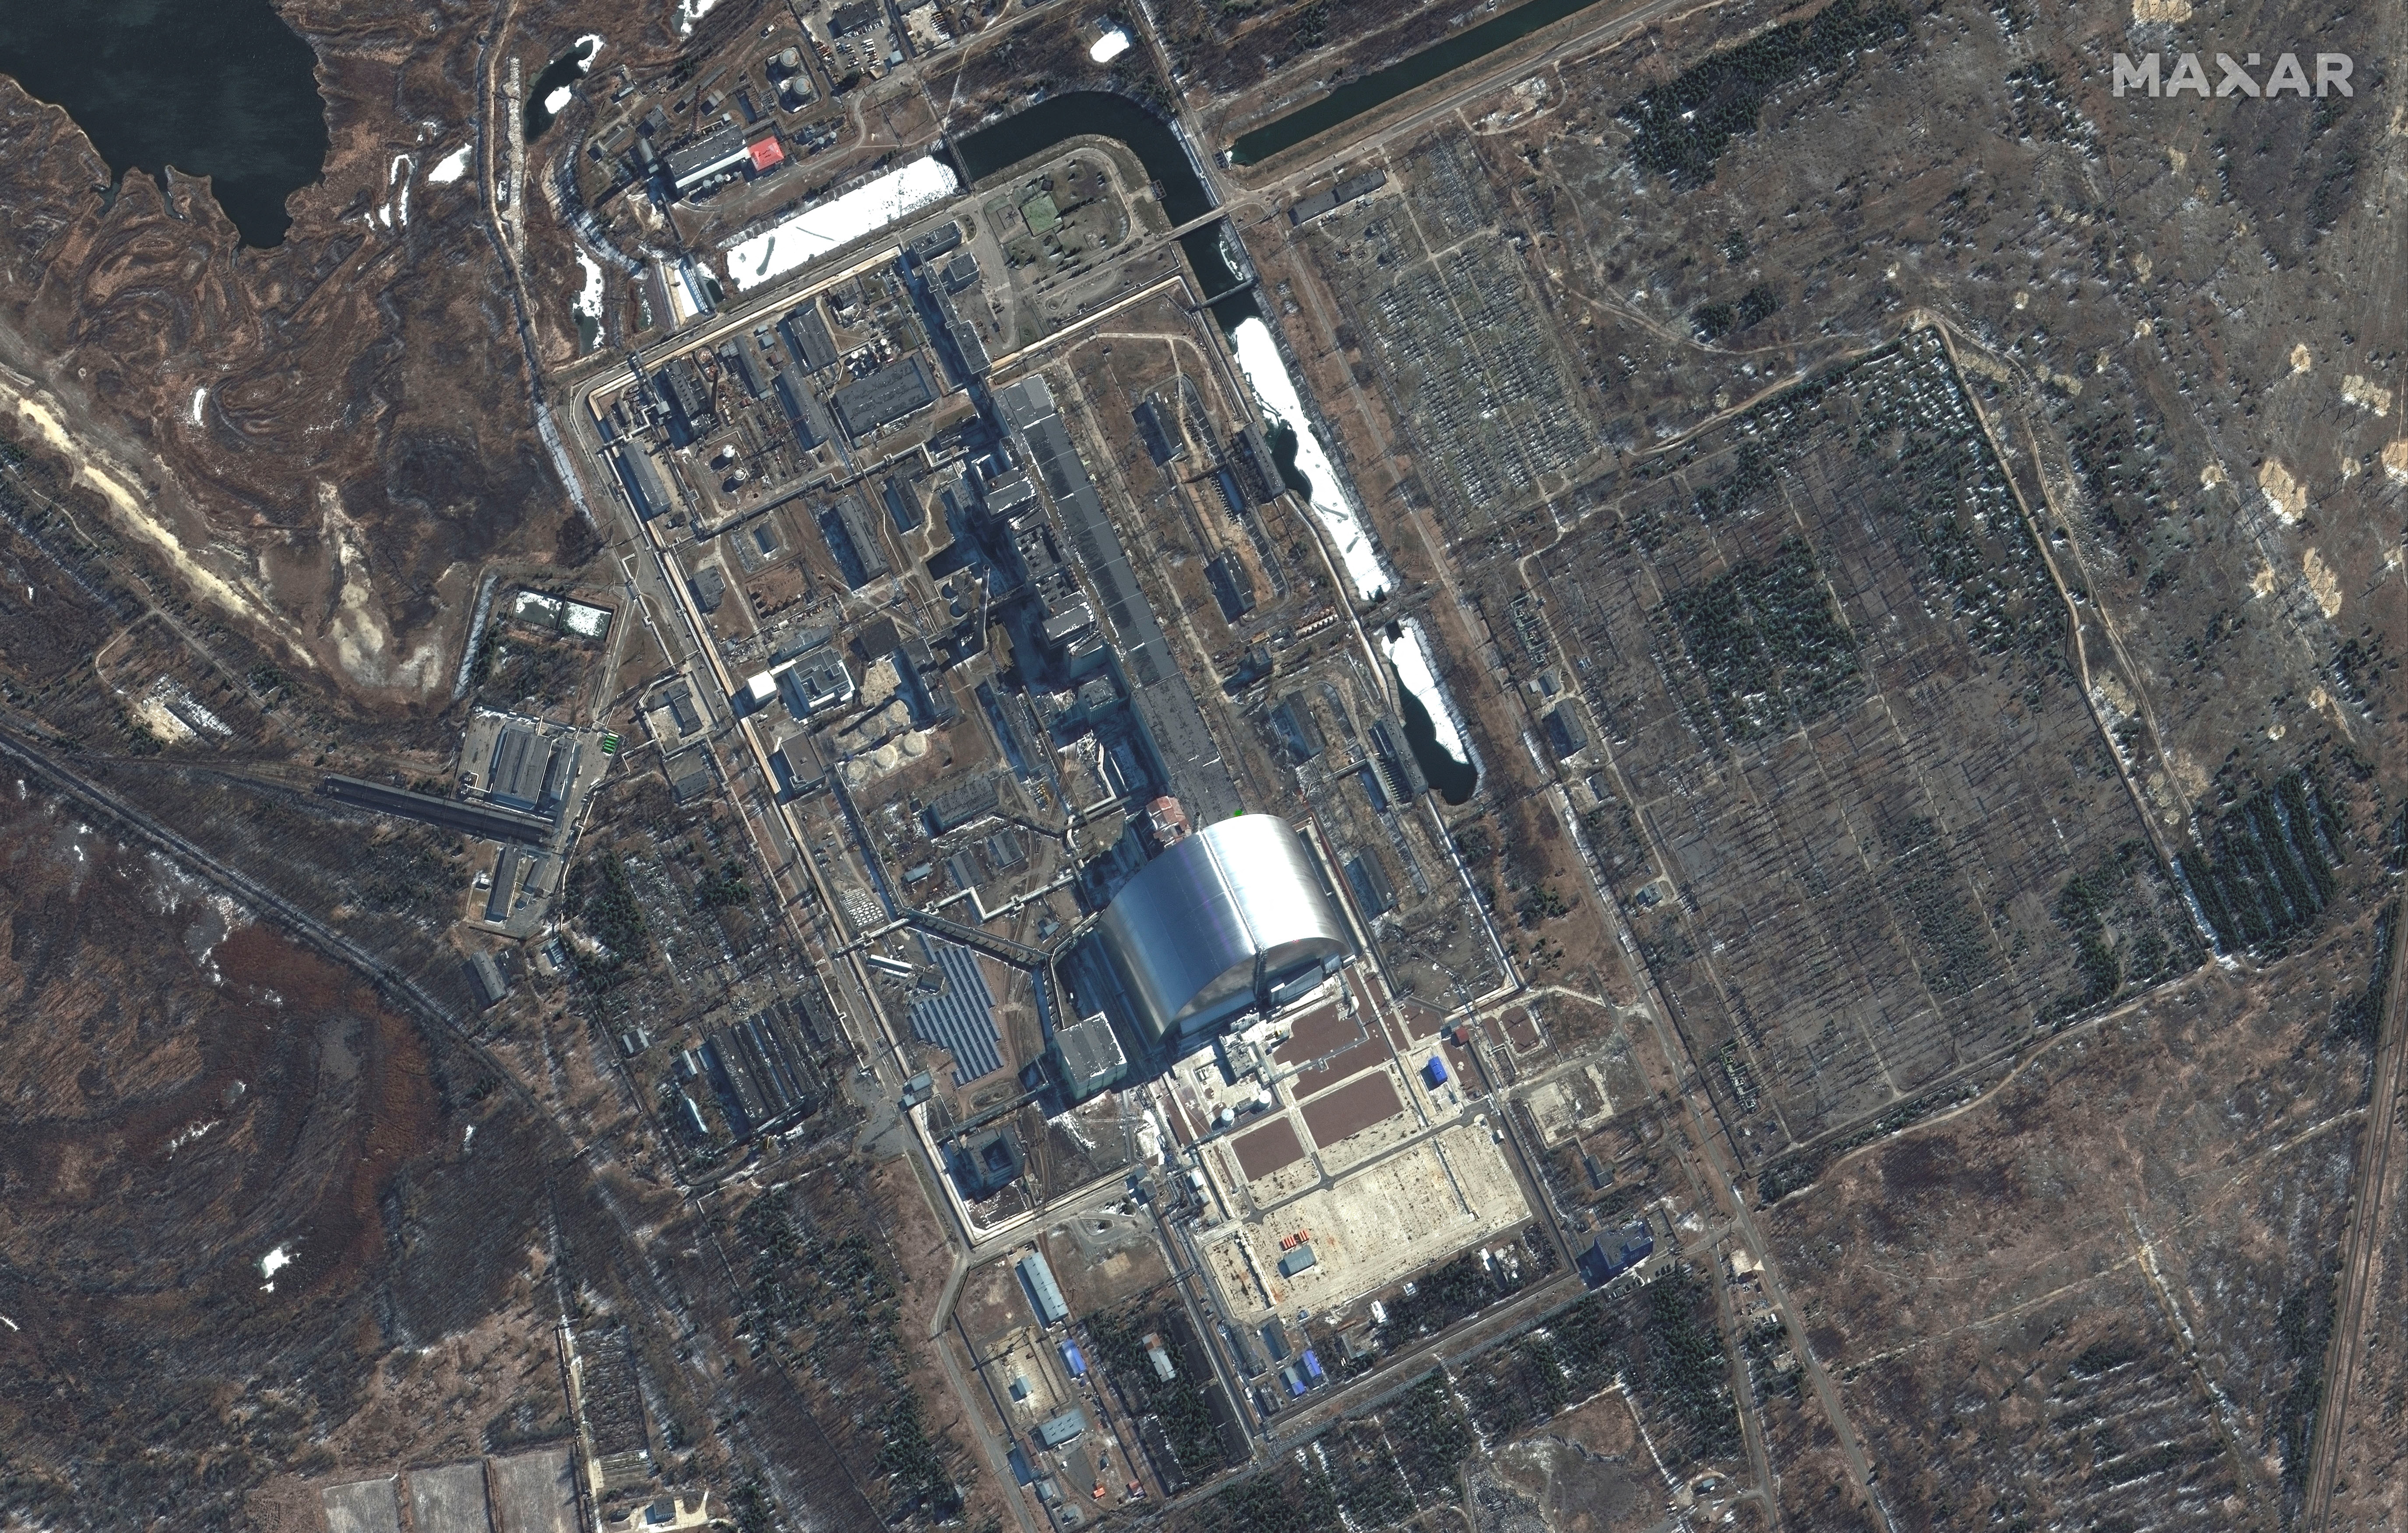 A satellite image shows an overview of Chernobyl